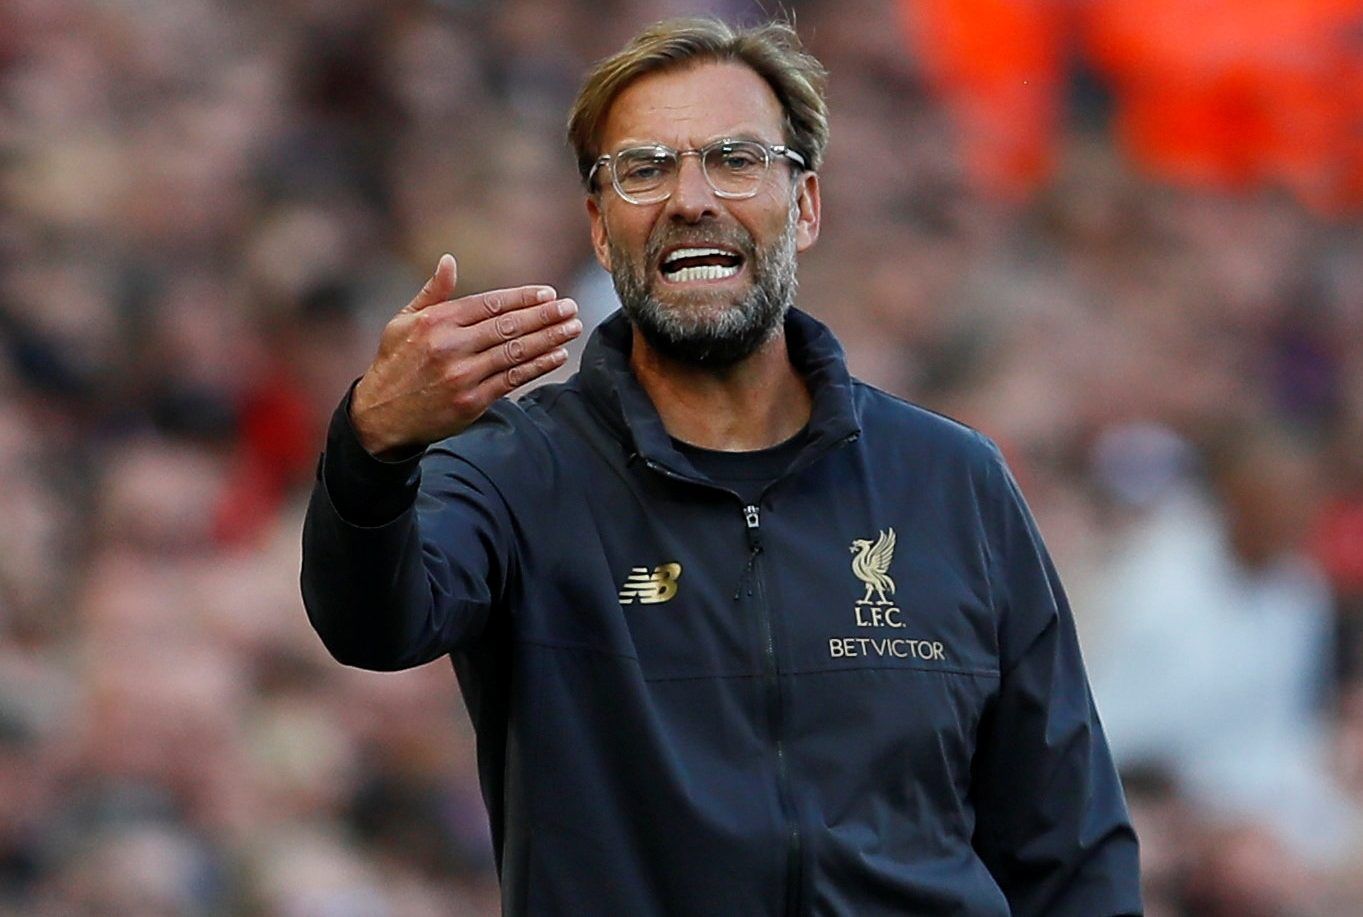 Soccer Football - Premier League - Liverpool v Brighton &amp; Hove Albion - Anfield, Liverpool, Britain - August 25, 2018  Liverpool manager Juergen Klopp gestures      Action Images via Reuters/Jason Cairnduff  EDITORIAL USE ONLY. No use with unauthorized audio, video, data, fixture lists, club/league logos or 